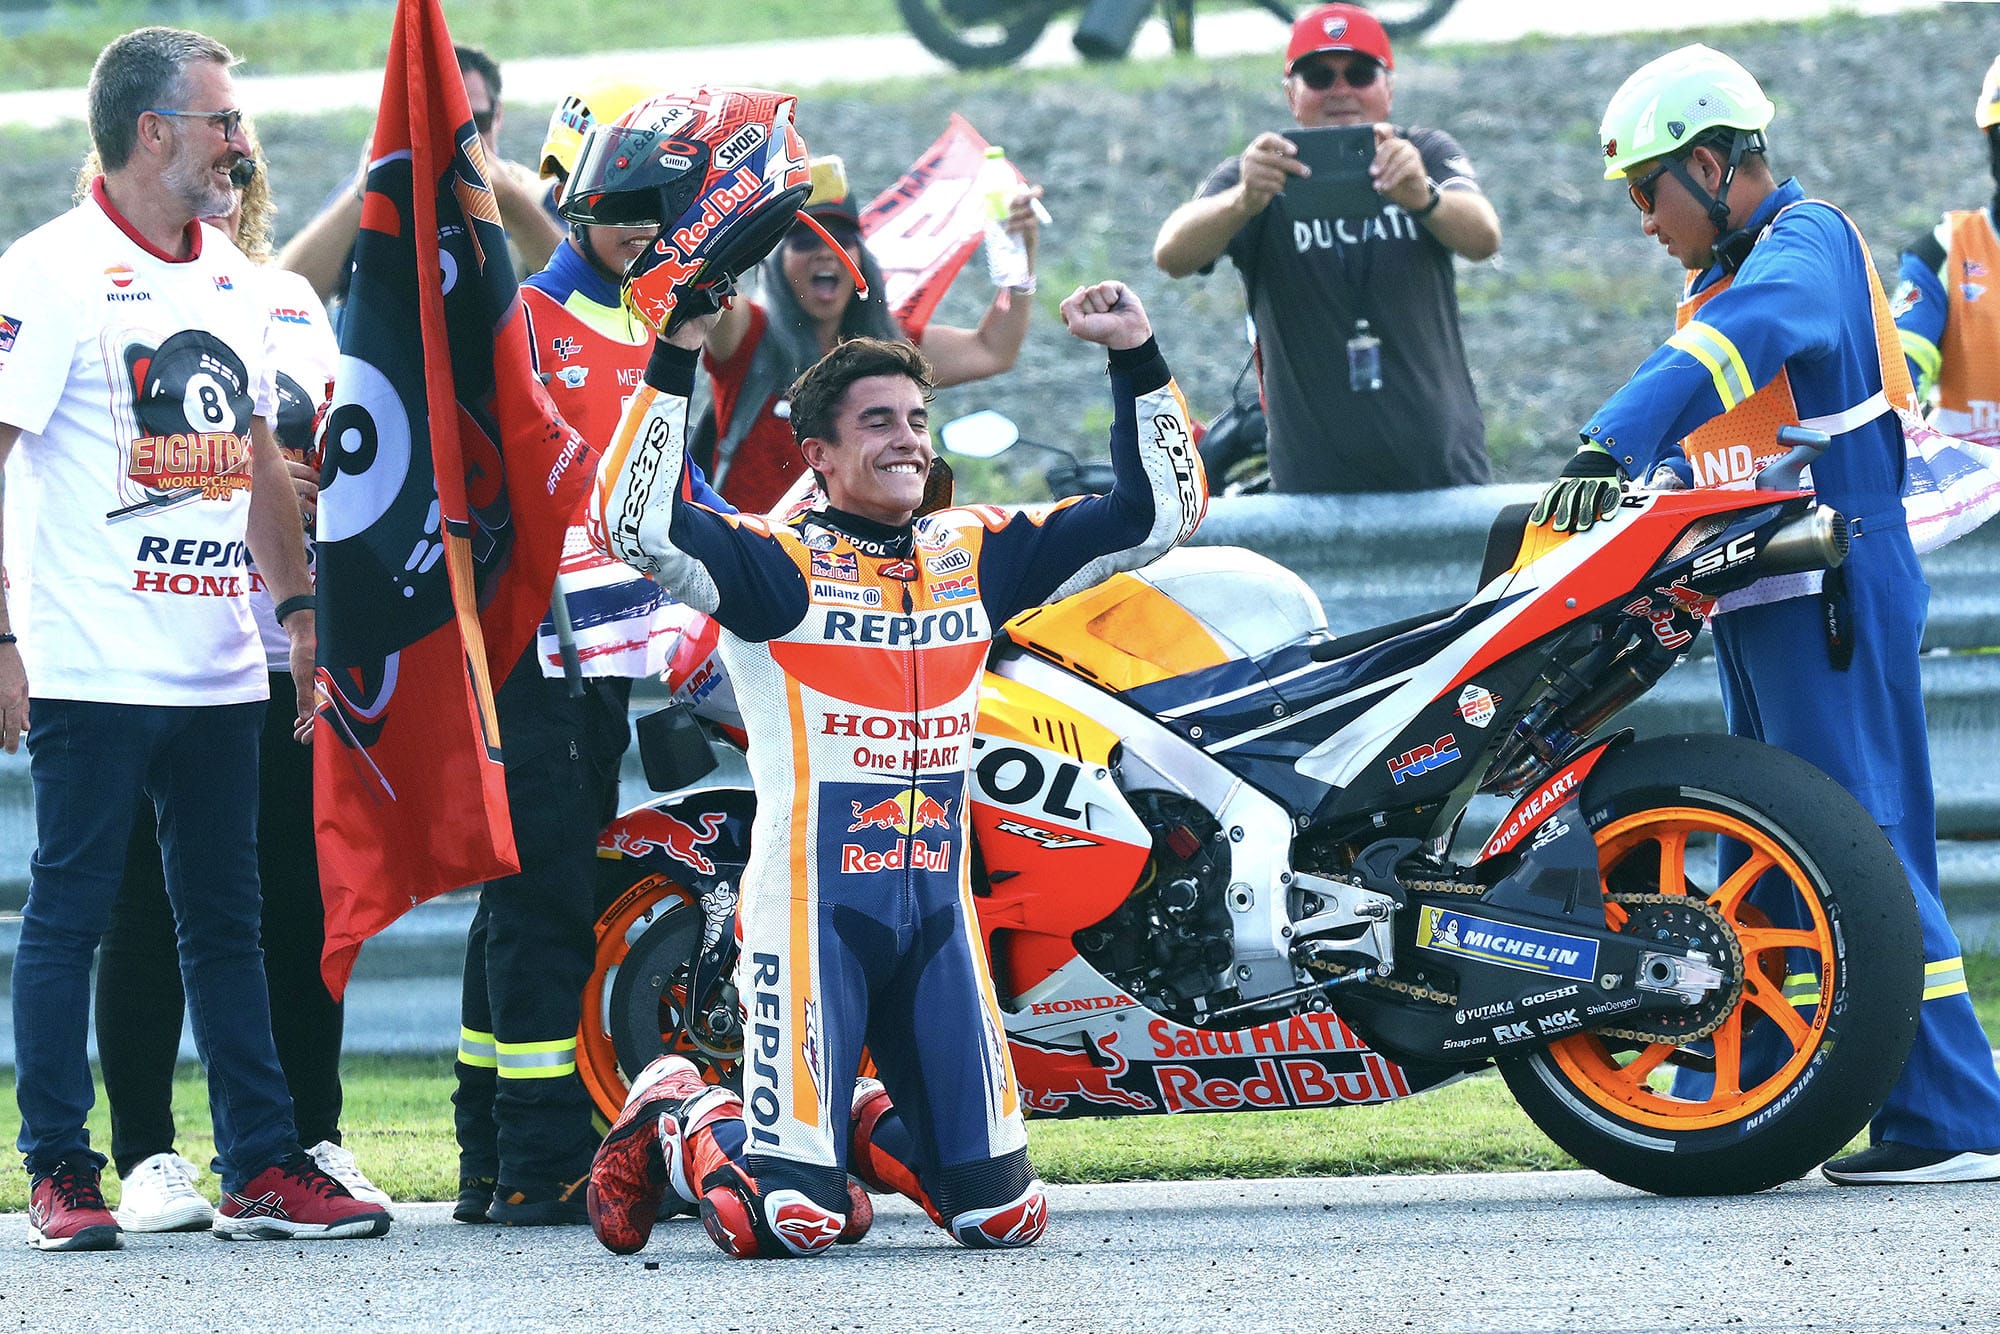 Marc Marquez on his knees after winning his sixth MotoGP championship at the 2019 Thailand Grand Prix